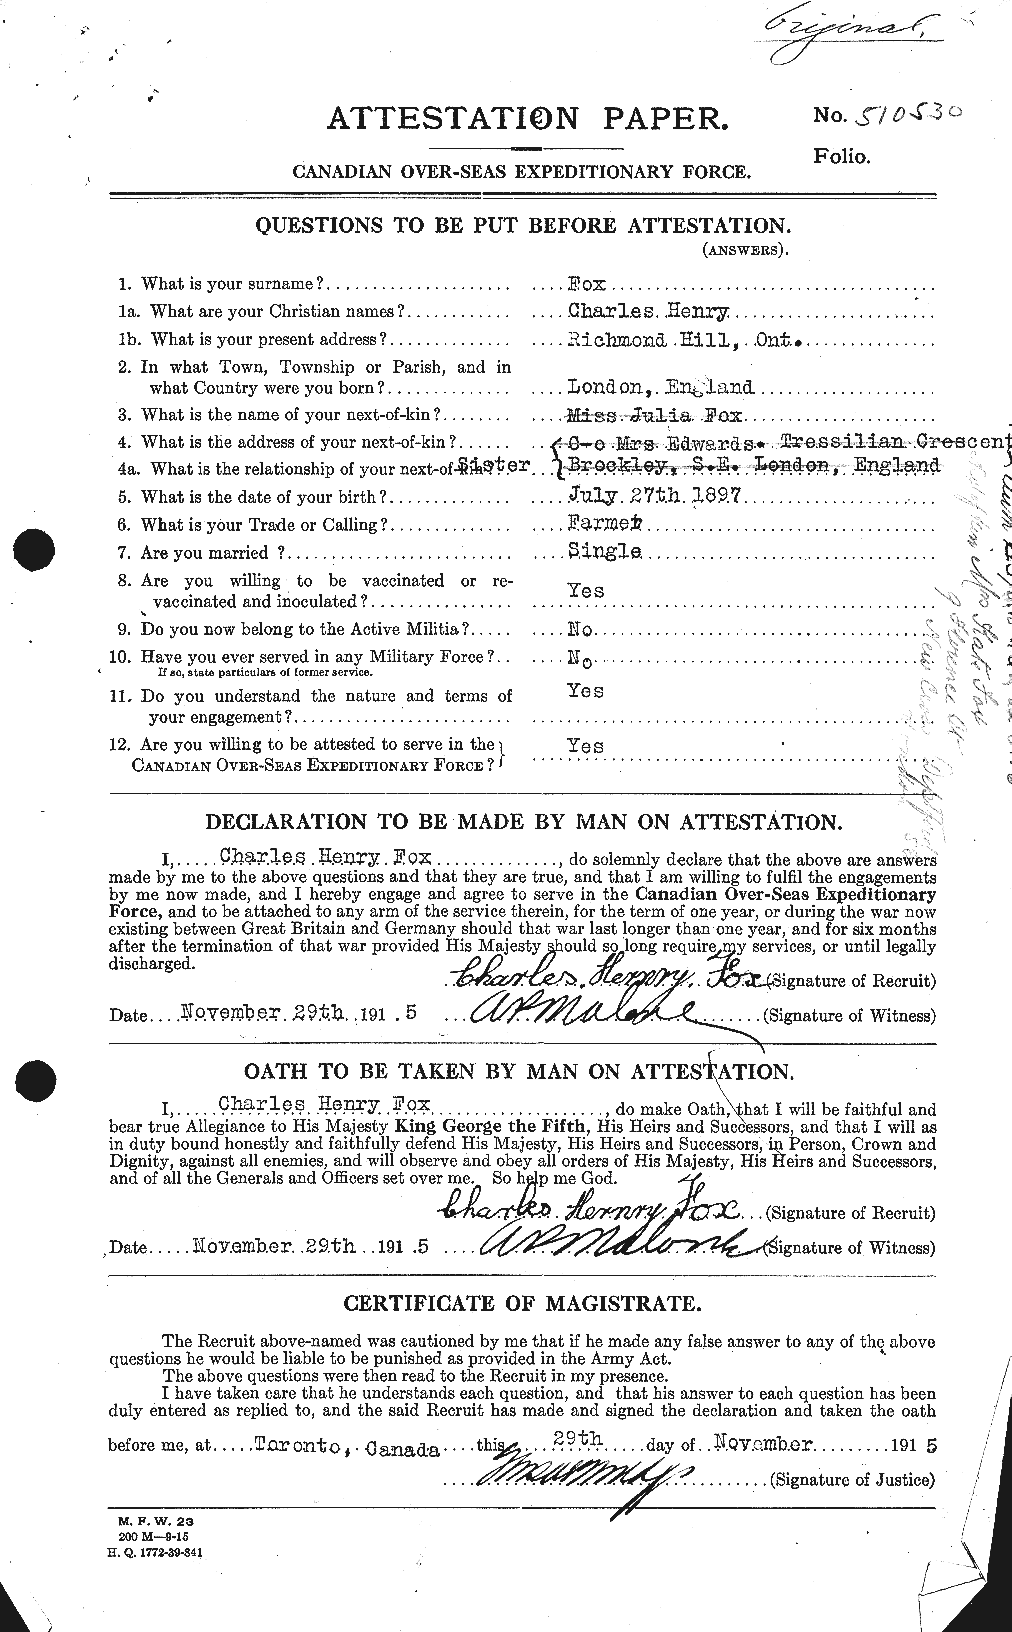 Personnel Records of the First World War - CEF 331256a